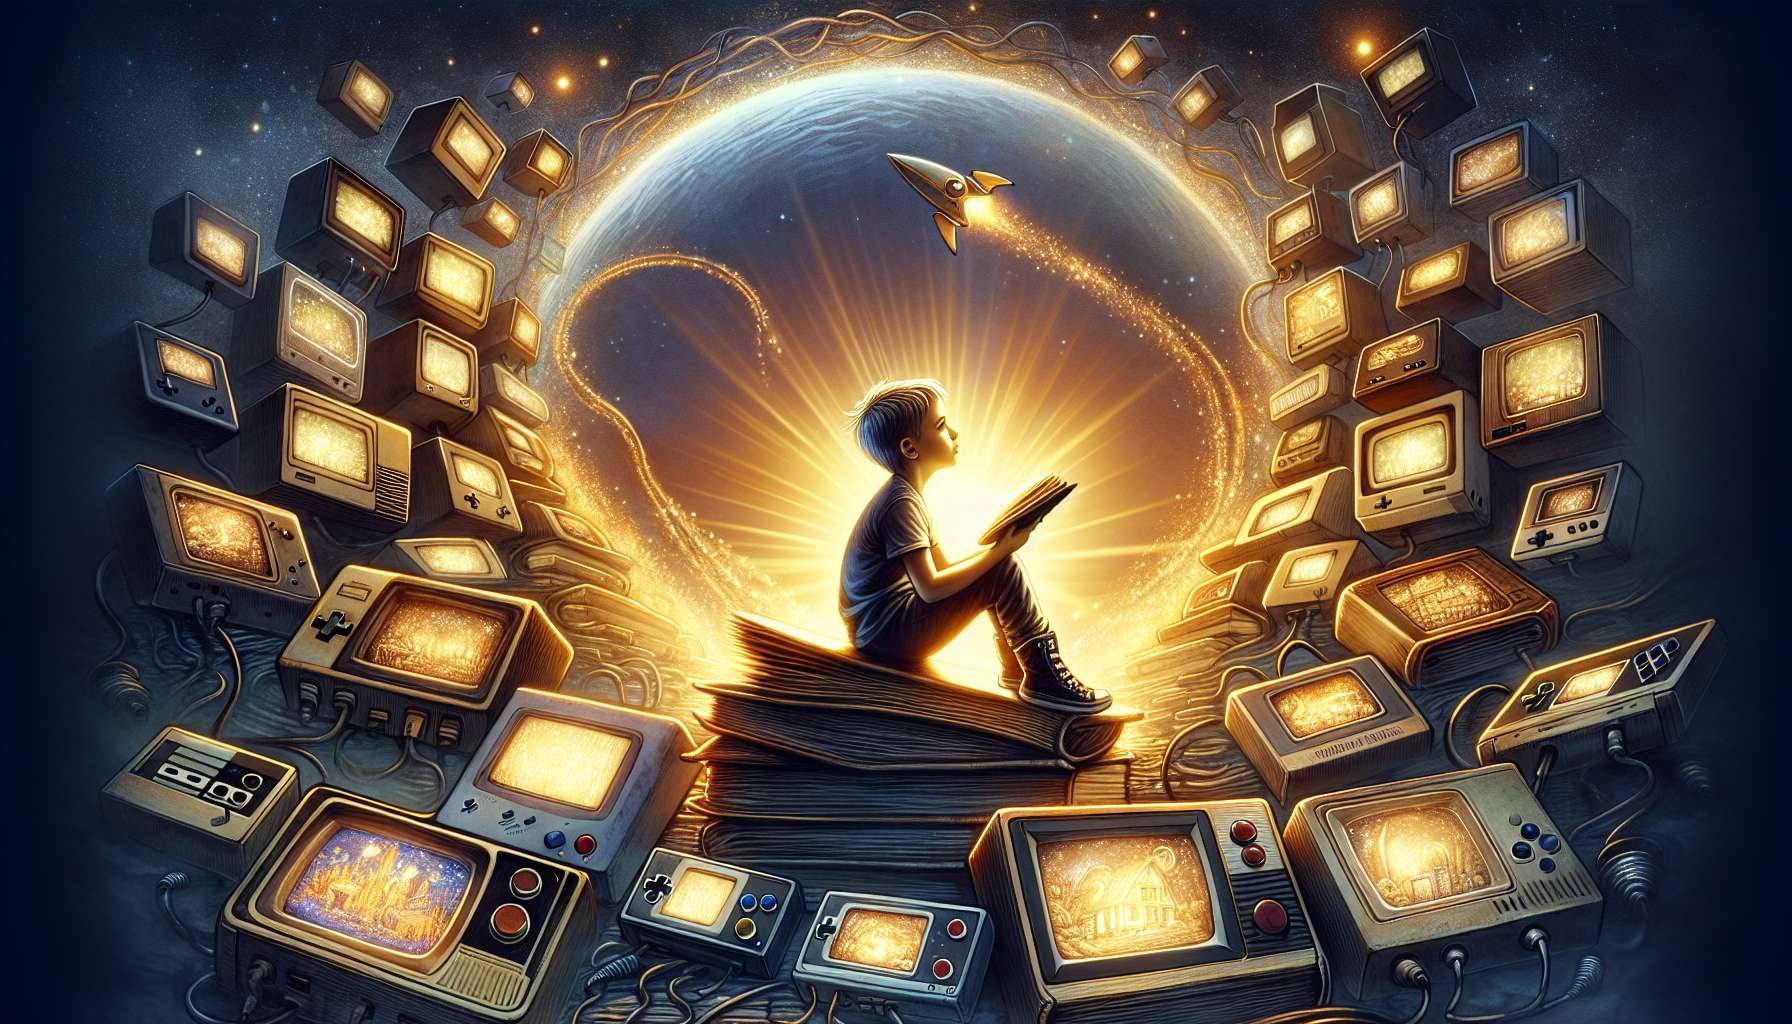 Illustration of a young Owen Haley surrounded by gaming consoles and storytelling books